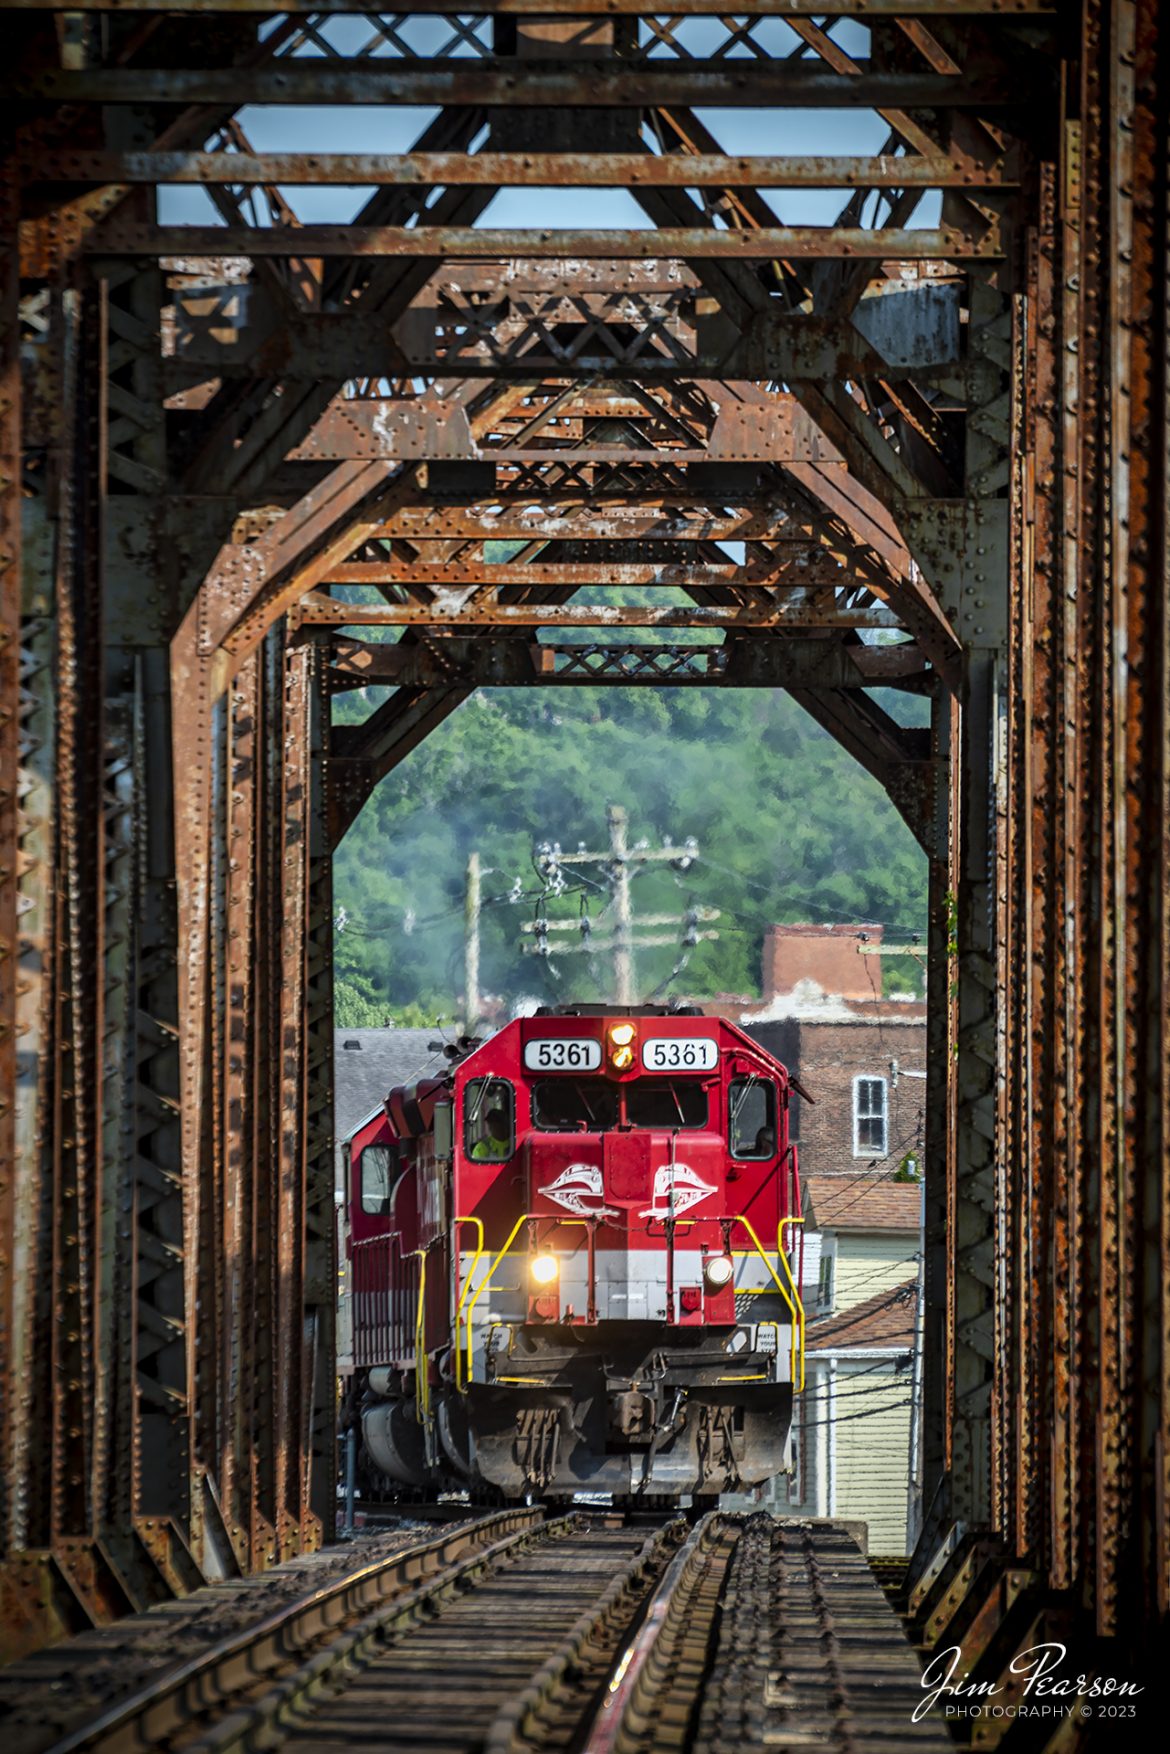 RJ Corman 5361 leads a train loaded with aluminum ingots as they pull onto the bridge over the Kentucky River at Frankfort, Ky on the CSX LCL Subdivision on May 18th, 2023. This train is also referred to as the ALCAN train and it runs daily between Louisville and Berea, Ky, to and from the Novelis Recycling center at Berea. Alcan used to own the Company and the name most folks use for this train is still Alcan even though Novelis bought them out. 

The Berea plant is one of the worlds largest plants dedicated to aluminum can recycling, and they process approximately 20 percent of the United States used aluminum cans, by melting them down and producing sheet ingots, according to the Novelis website.

Tech Info: Nikon D800, RAW, Nikon 70-300 @ 260mm, f/5.6, 1/250, ISO 110.

#trainphotography #railroadphotography #trains #railways #dronephotography #trainphotographer #railroadphotographer #jimpearsonphotography #CSXtrains #NikonD800 #RJCtrain #RJCorman